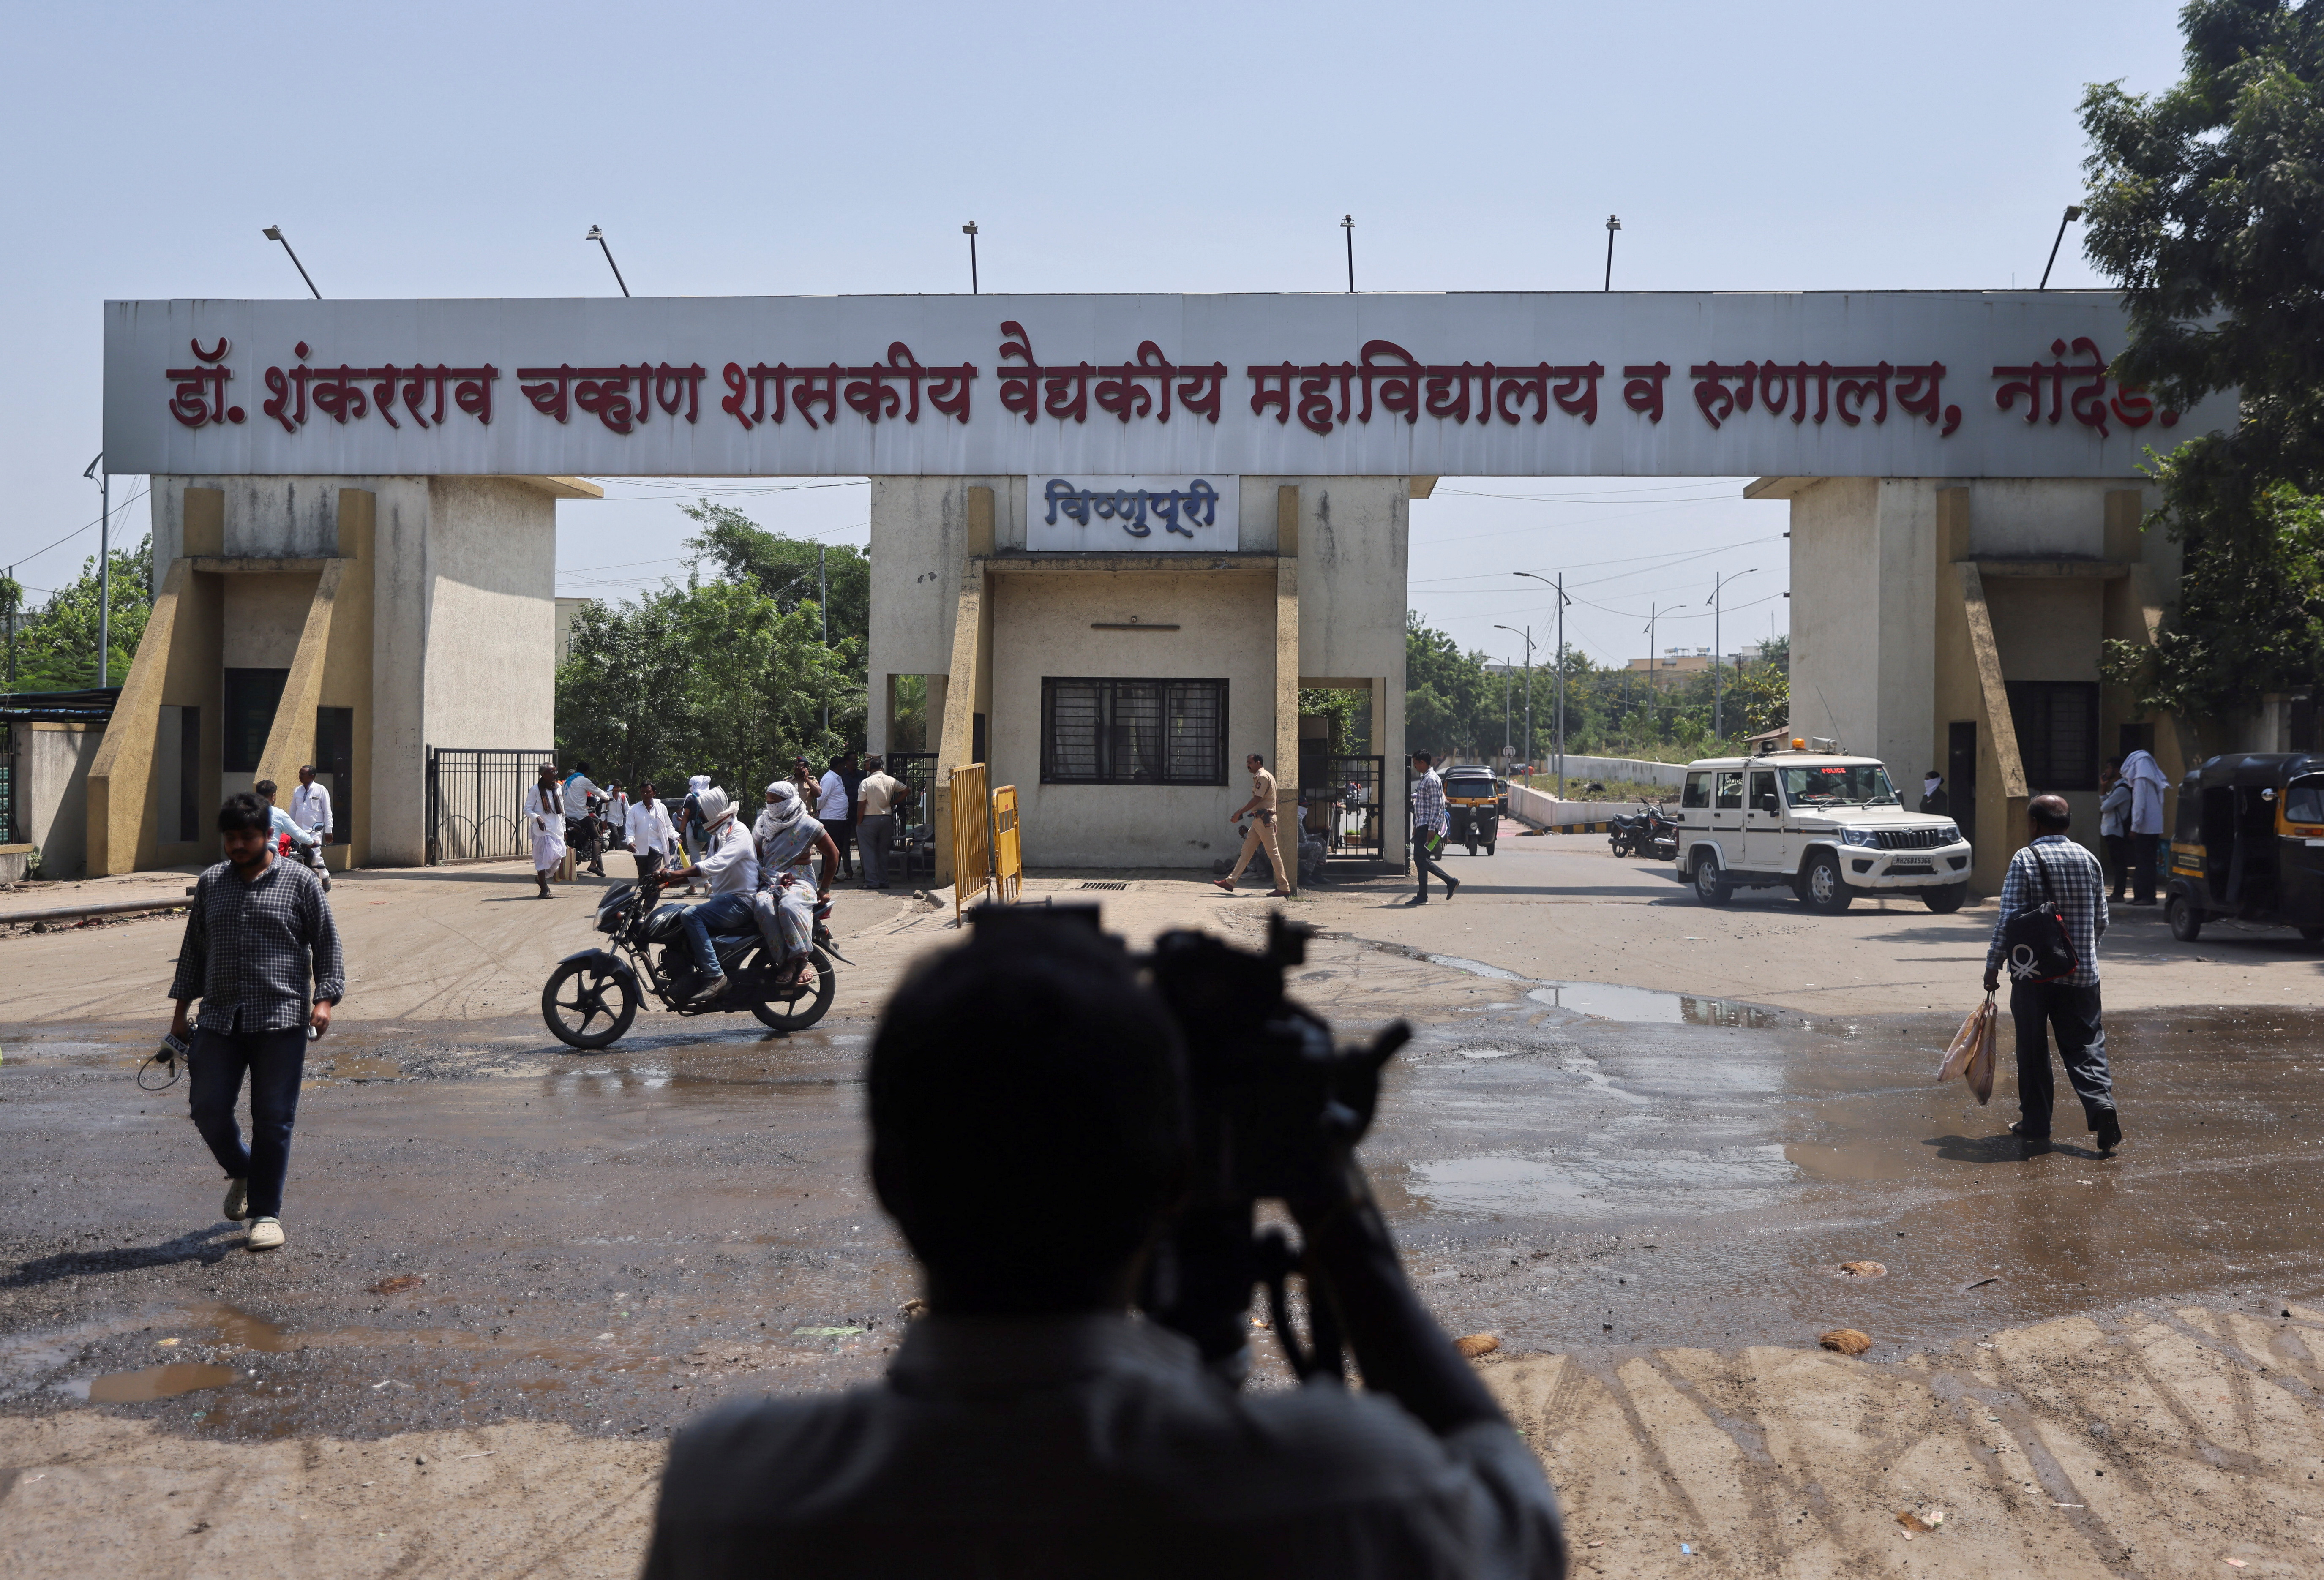 A media member takes a video outside the main gate of the Shankarrao Chavan Government Medical College and Hospital in Nanded